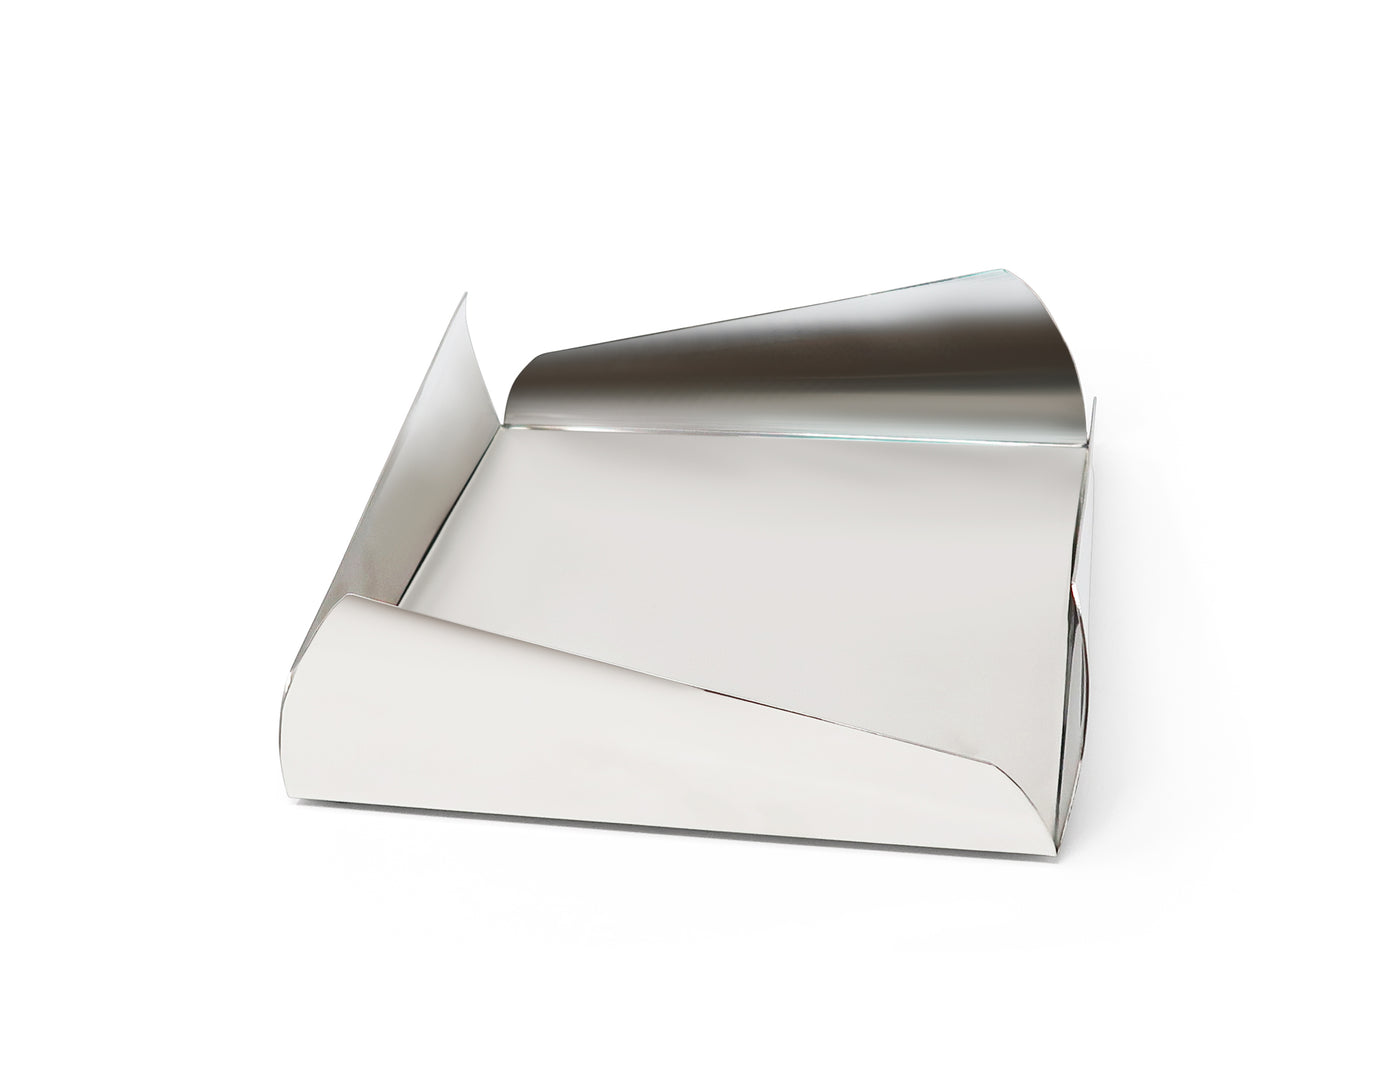 Stainless Steel Square Tray, 7"